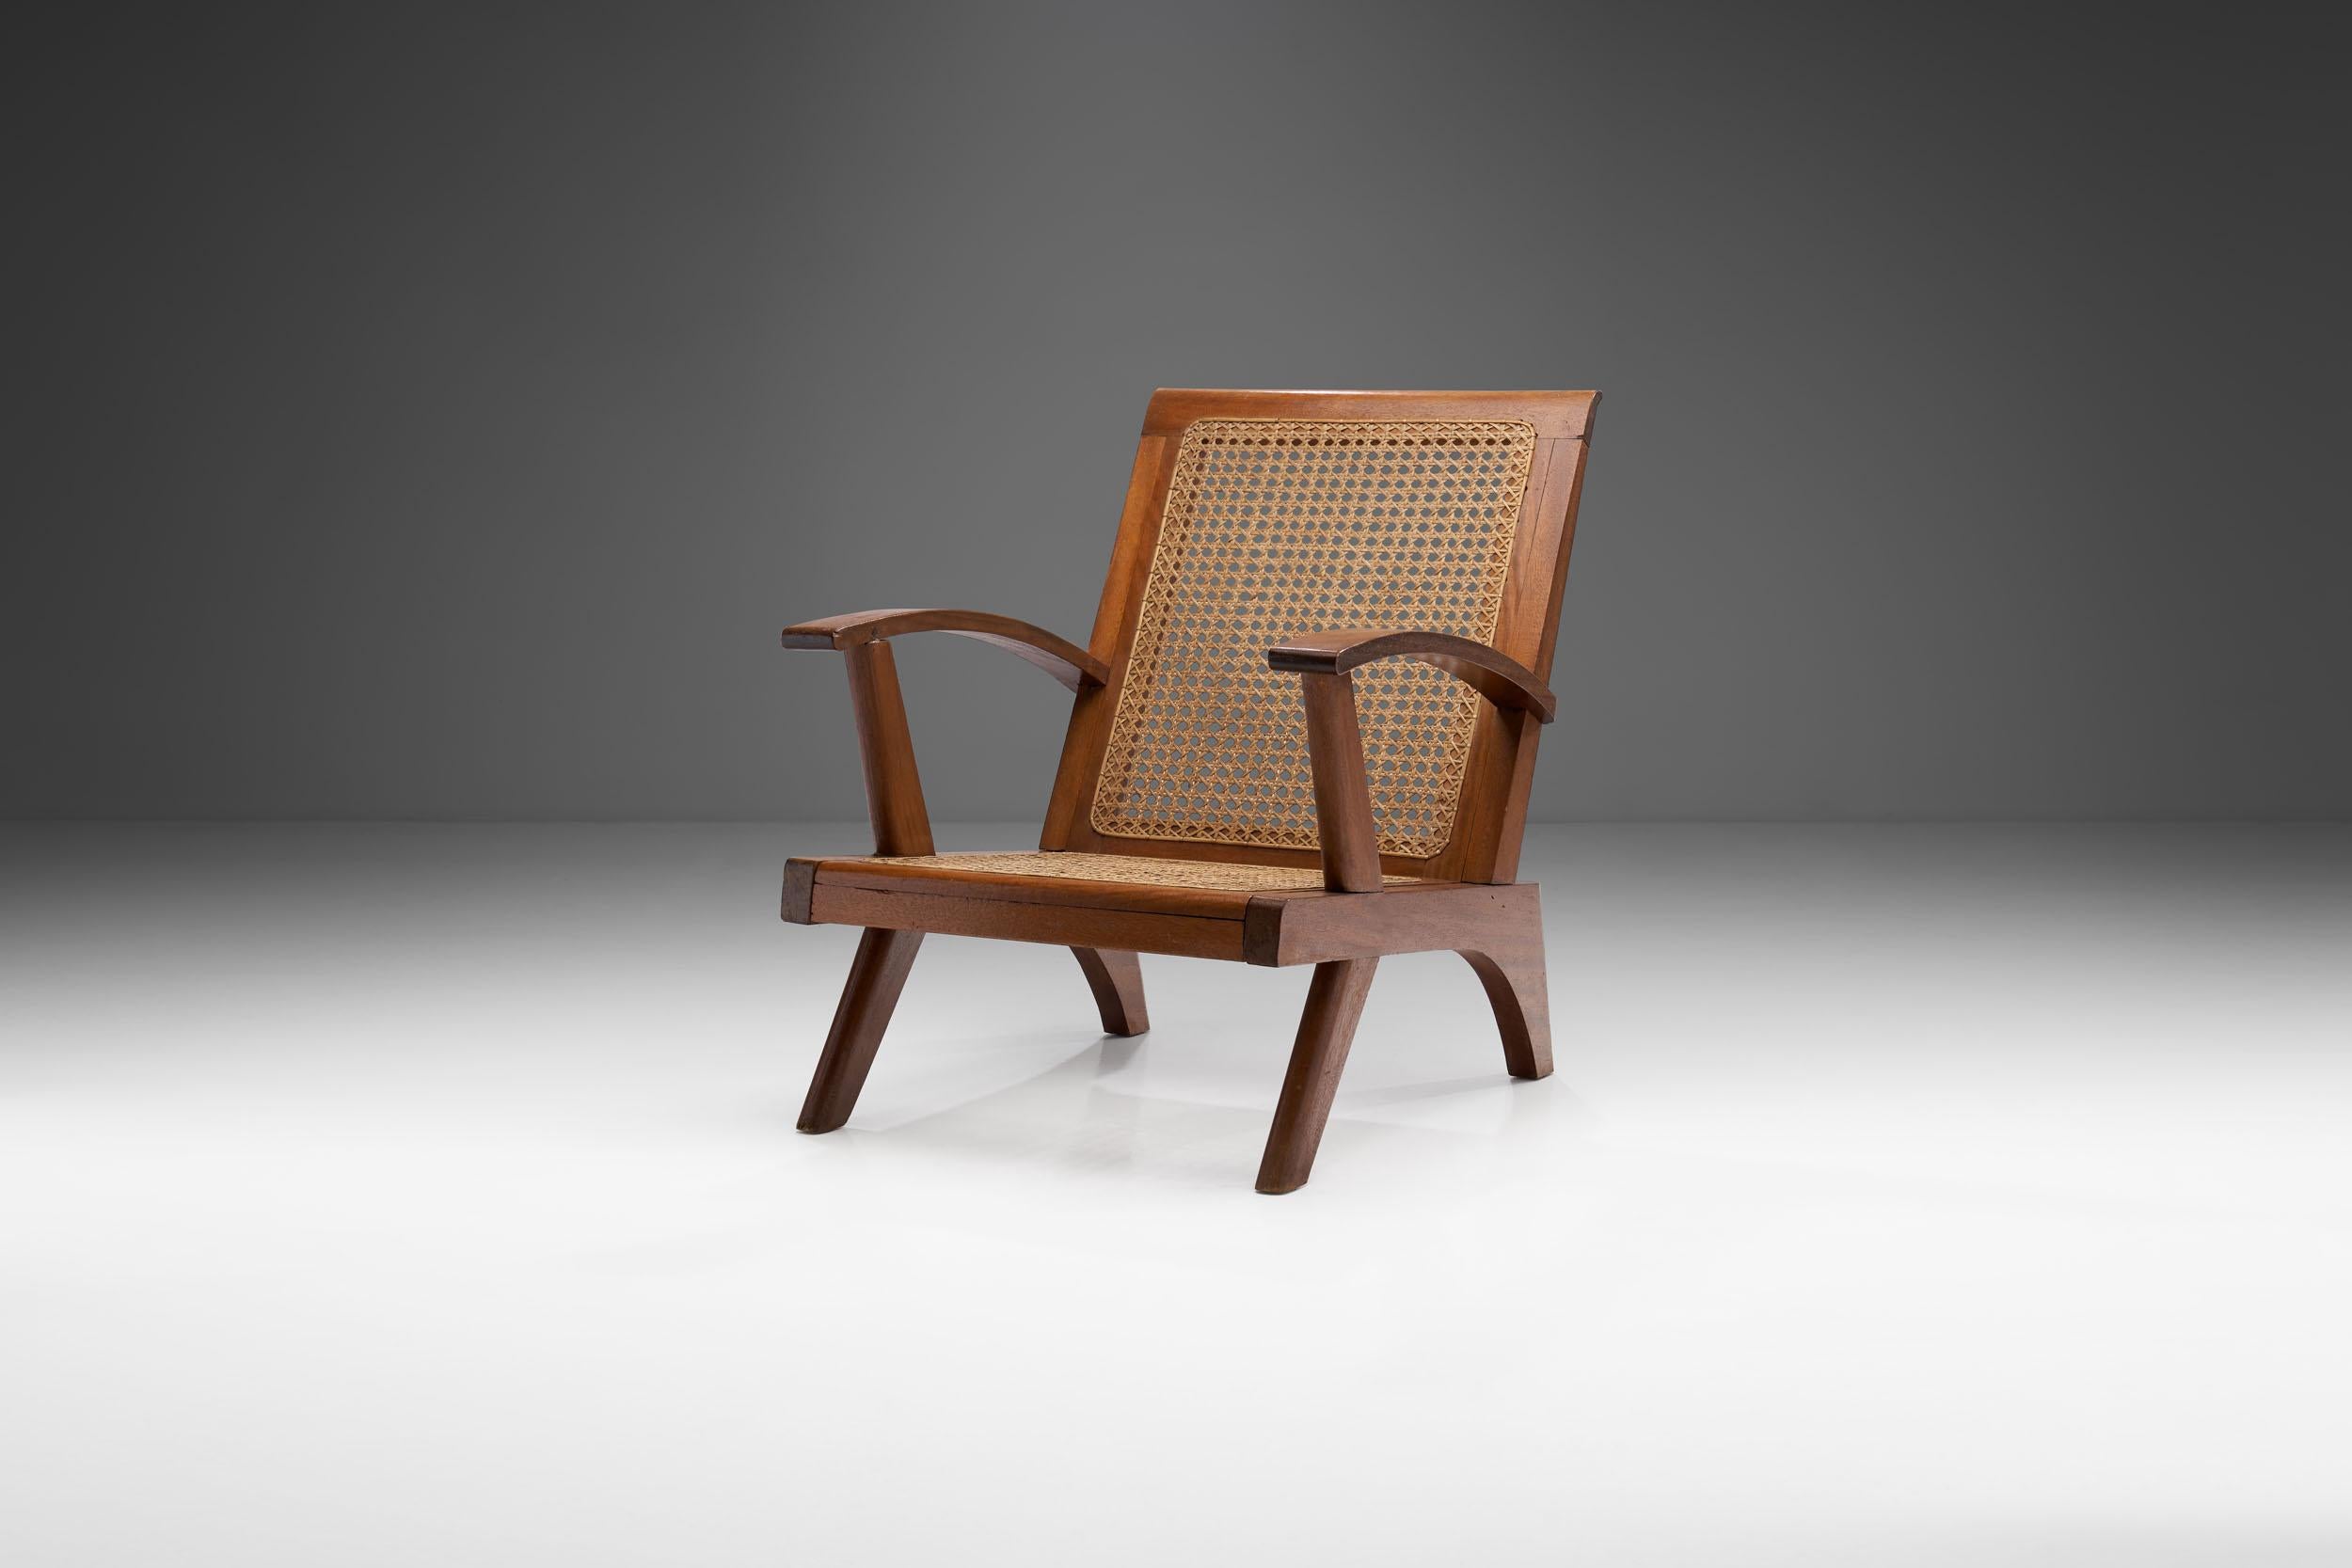 This mid-century French armchair combines a visually stunning structural body with expert caning technique and high-quality materials. 

As with the UK and much of Europe, there was something of a design Renaissance in France in the 1950s, due to